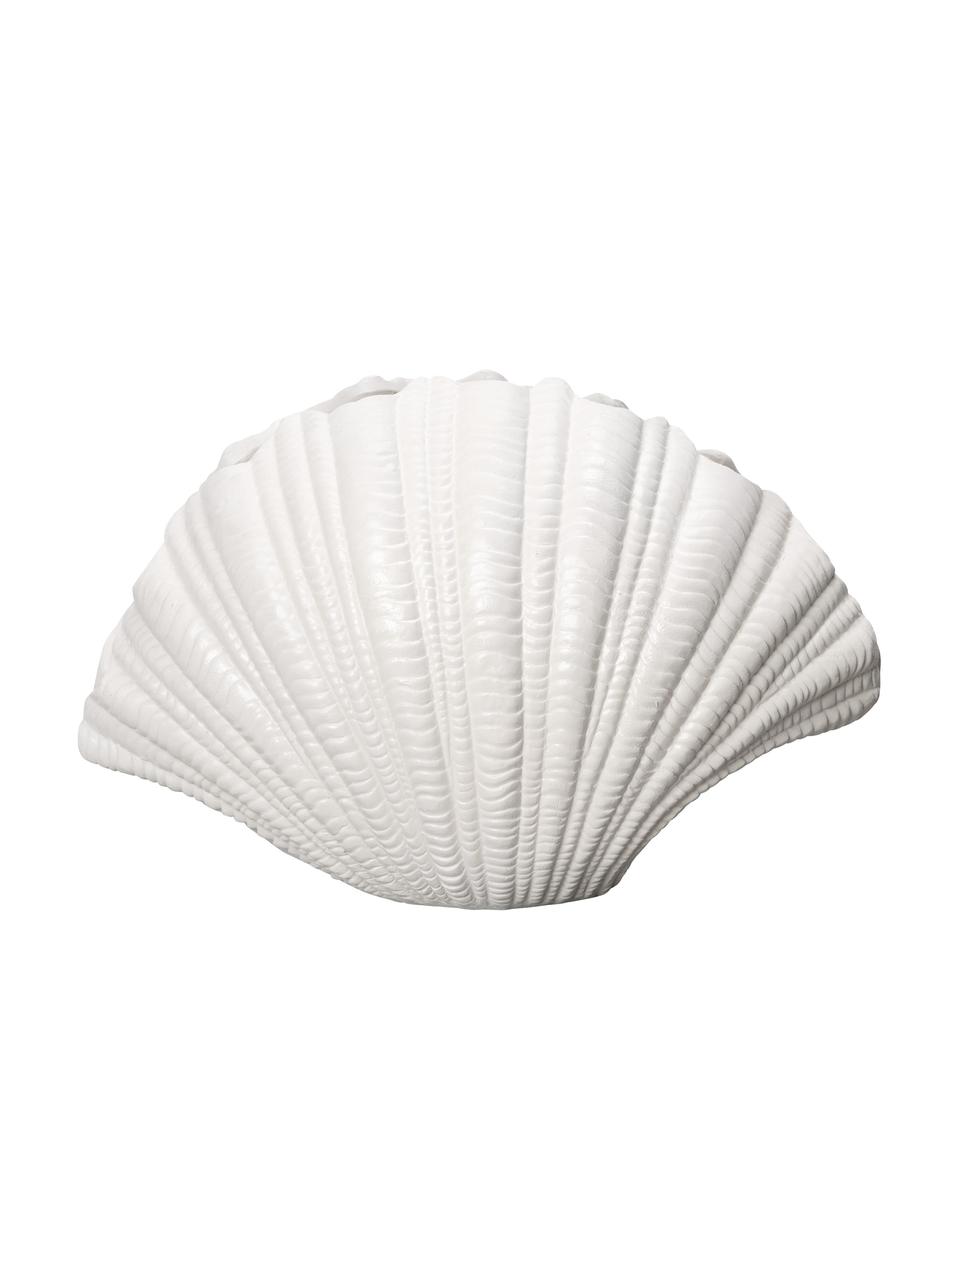 Grote design vaas Shell in wit, Kunststof, Wit, B 31 x H 21 cm